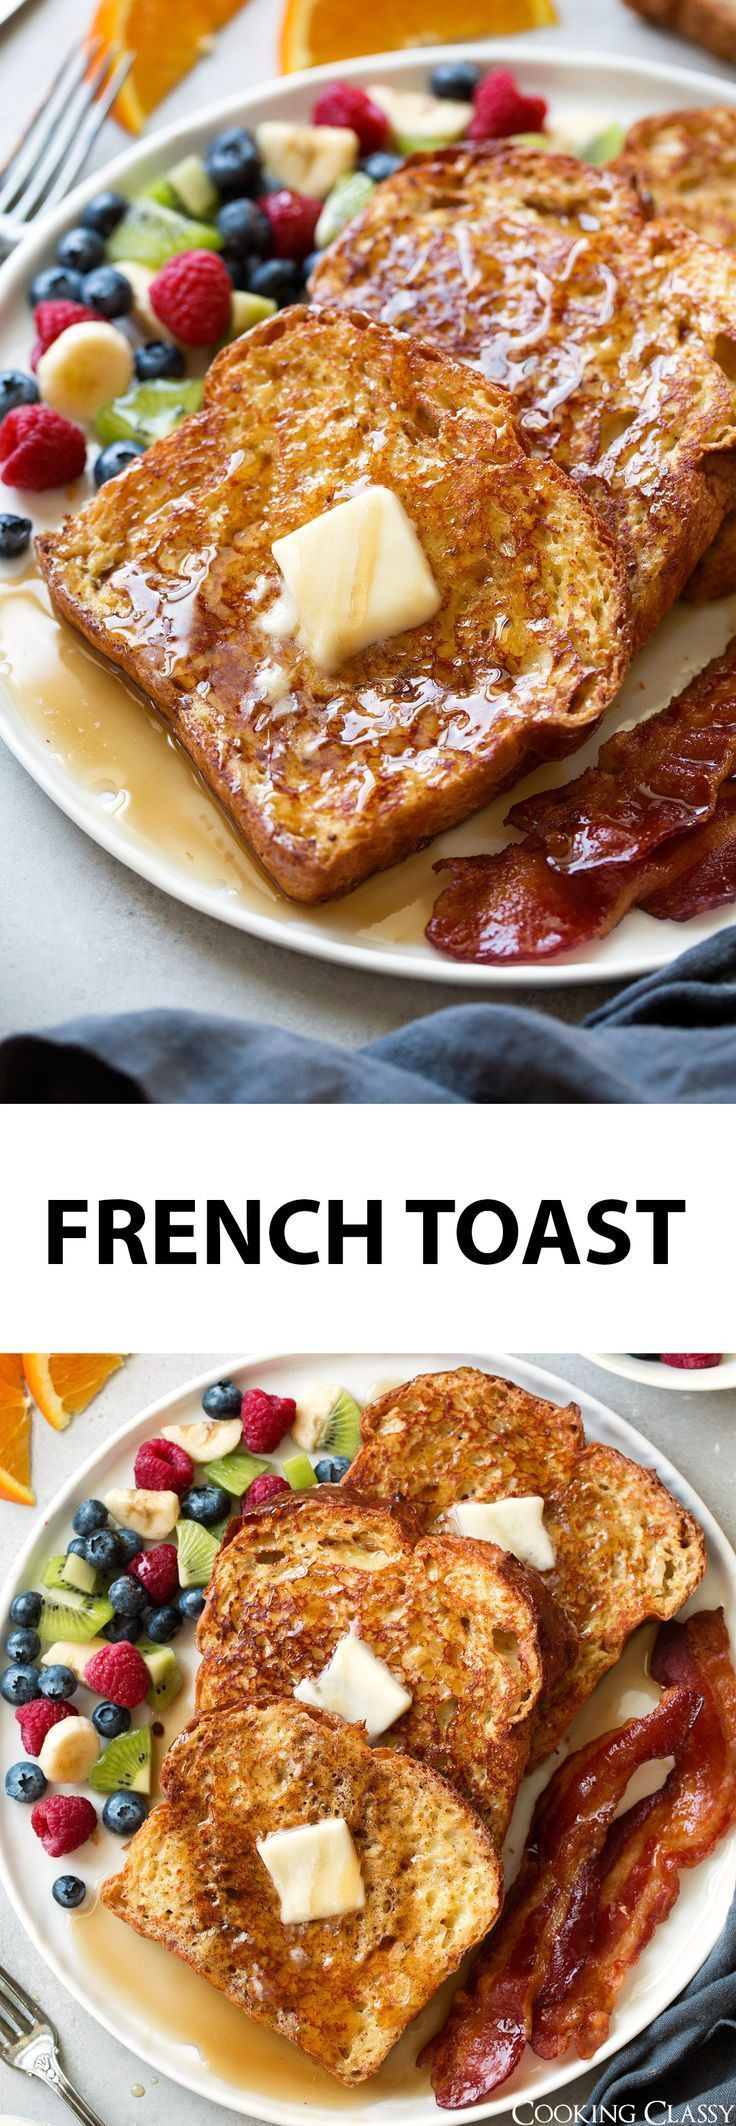 French Toast Egg To Milk Ratio
 The Best French Toast Cooking Classy